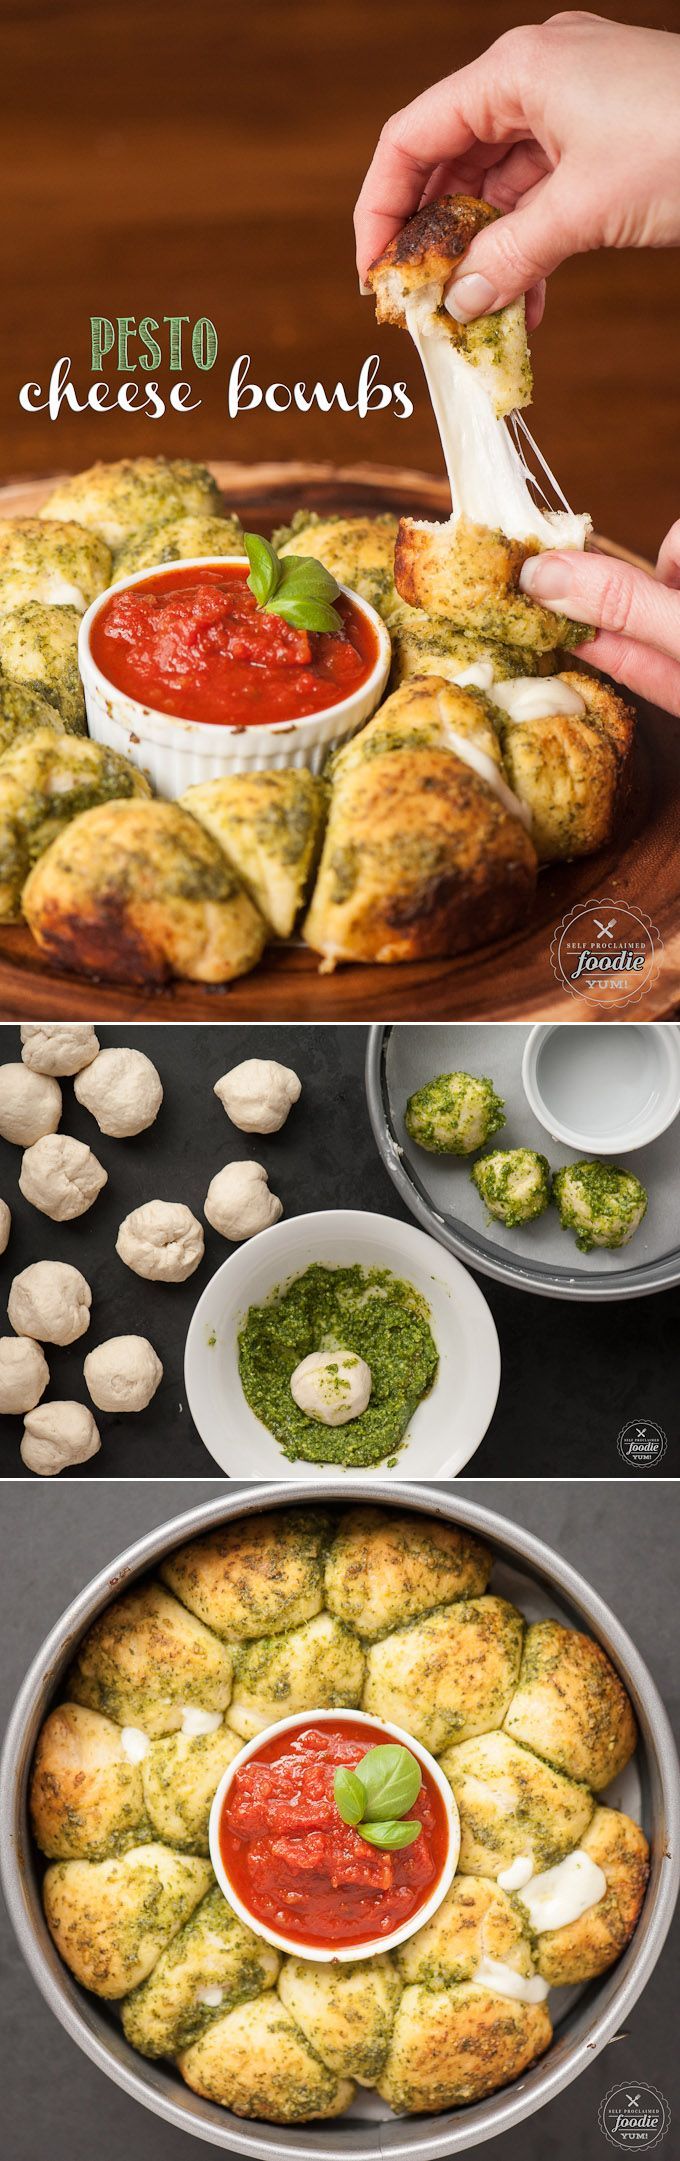 Ooey gooey melty Pesto Cheese Bombs with marinara sauce are super easy to make and